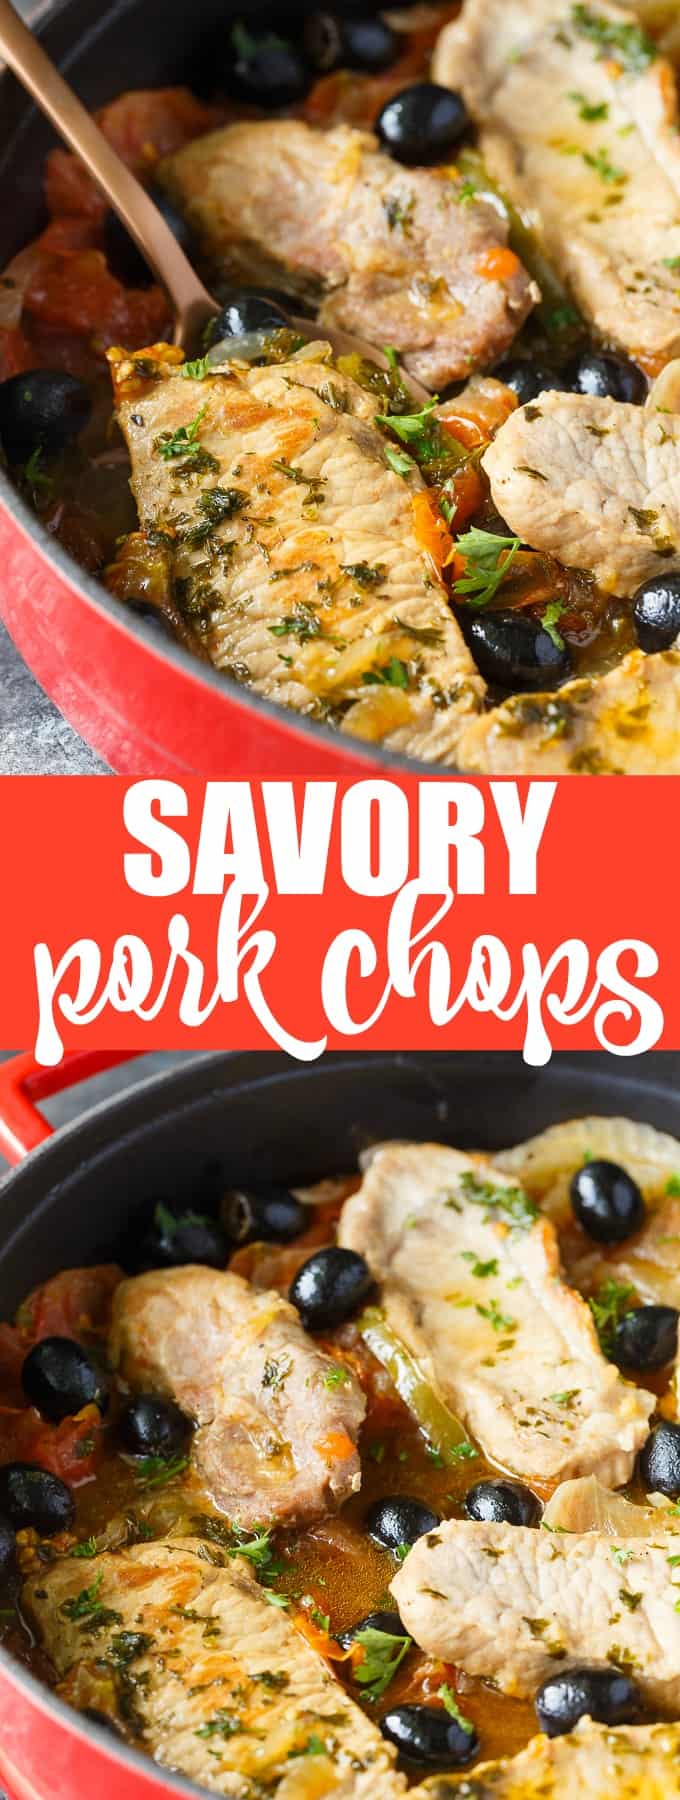 Savory Pork Chops - Tender pork chops are cooked in a savory sauce filled with tomatoes, garlic, green peppers, black olives and spices. A super easy weeknight meal for your family. 